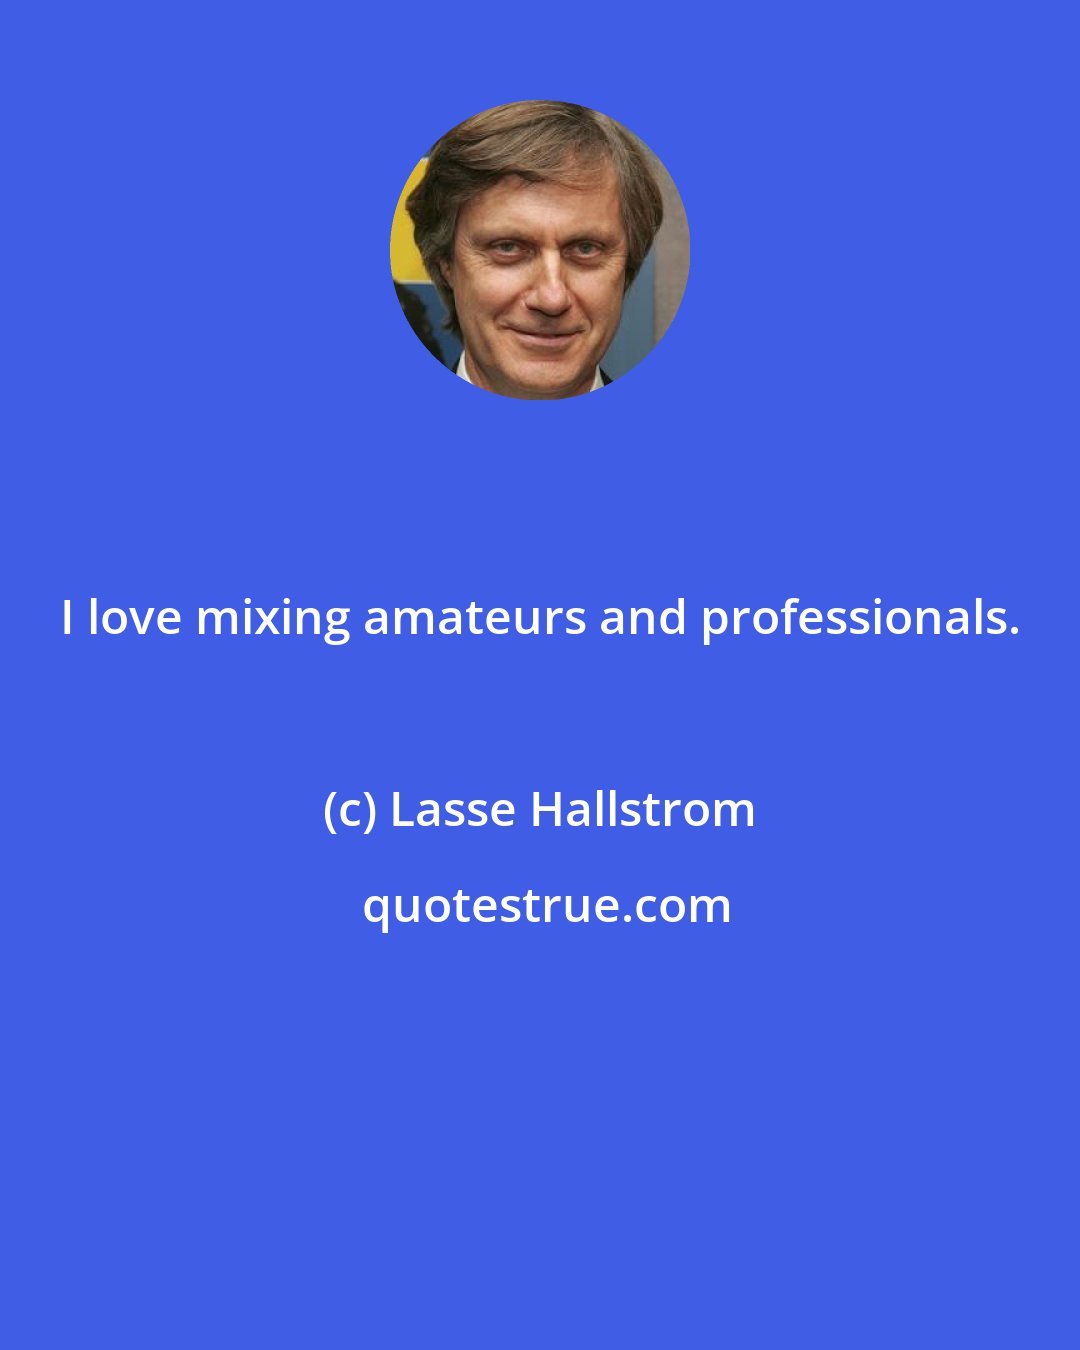 Lasse Hallstrom: I love mixing amateurs and professionals.